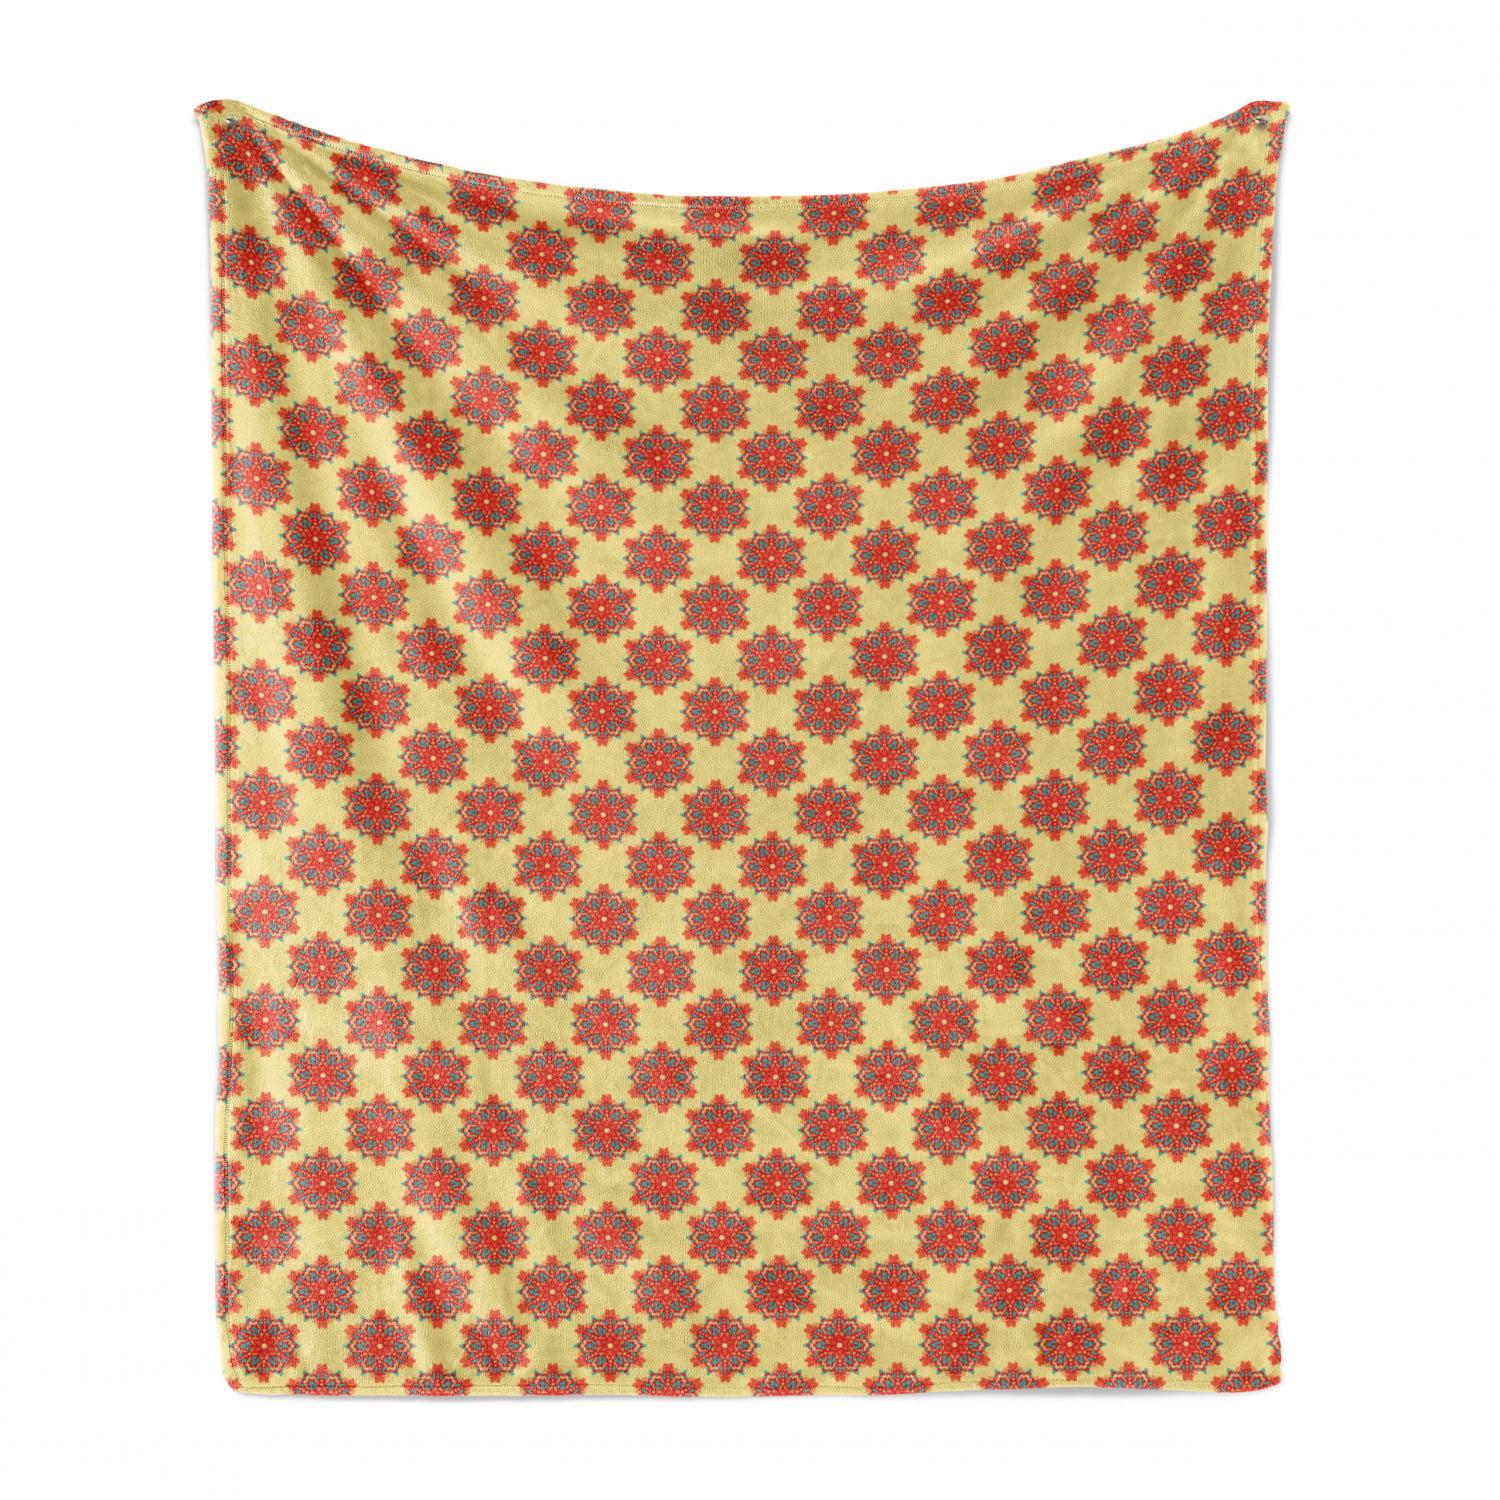 Cozy Plush for Indoor and Outdoor Use 50 x 60 Orange Yellow Burgundy Folkloric Borders Triangle Motifs with Circles and Abstract Sun Ambesonne Aztec Soft Flannel Fleece Throw Blanket